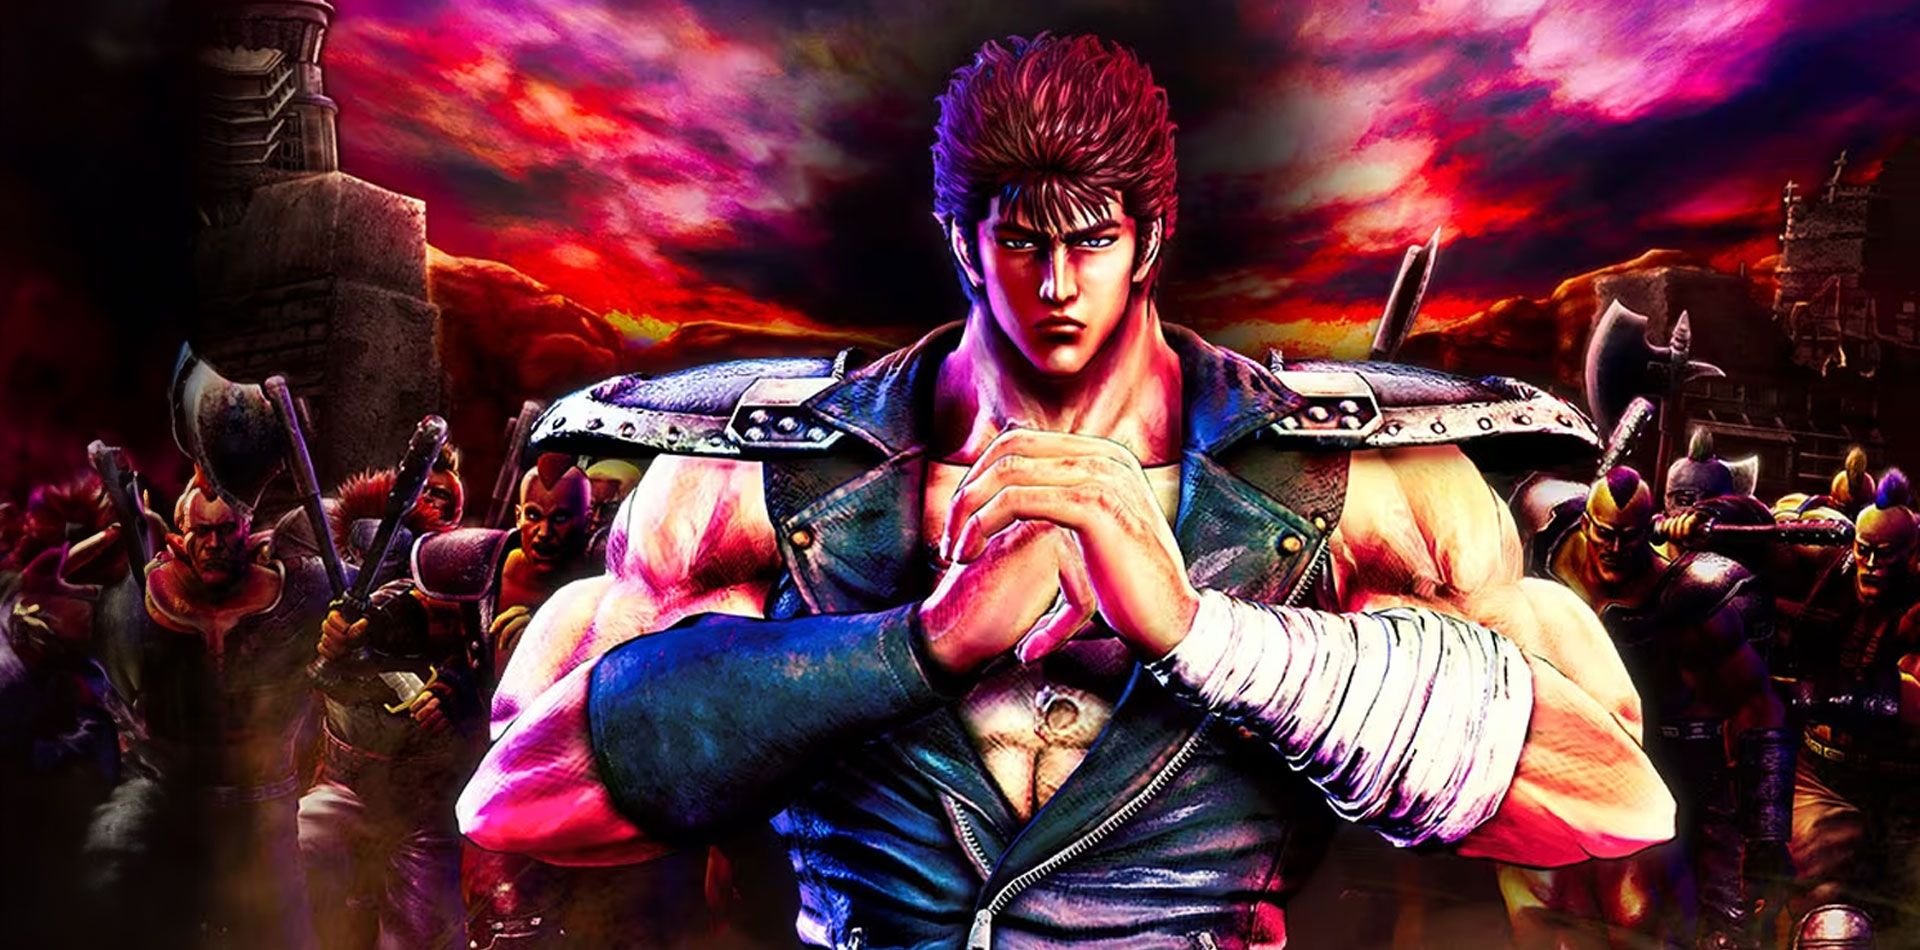 Kenshiro from Fist of the North Star with a bunch of soldiers attacking in the background.